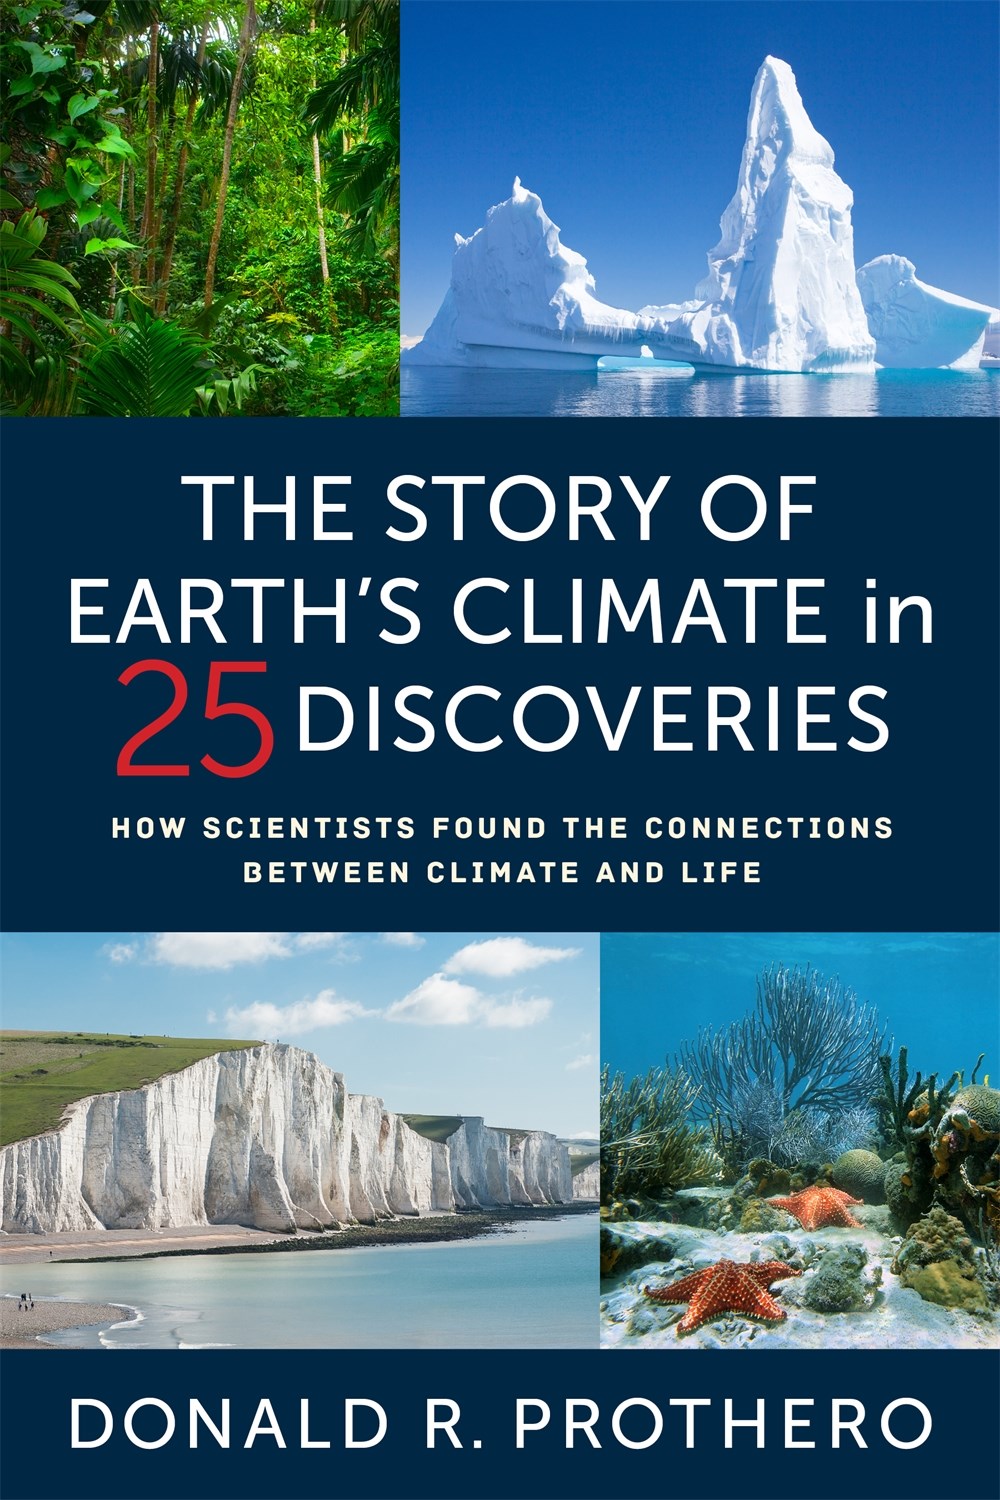 The Story of Earth’s Climate in 25 Discoveries: How Scientists Found the Connections Between Climate and Life